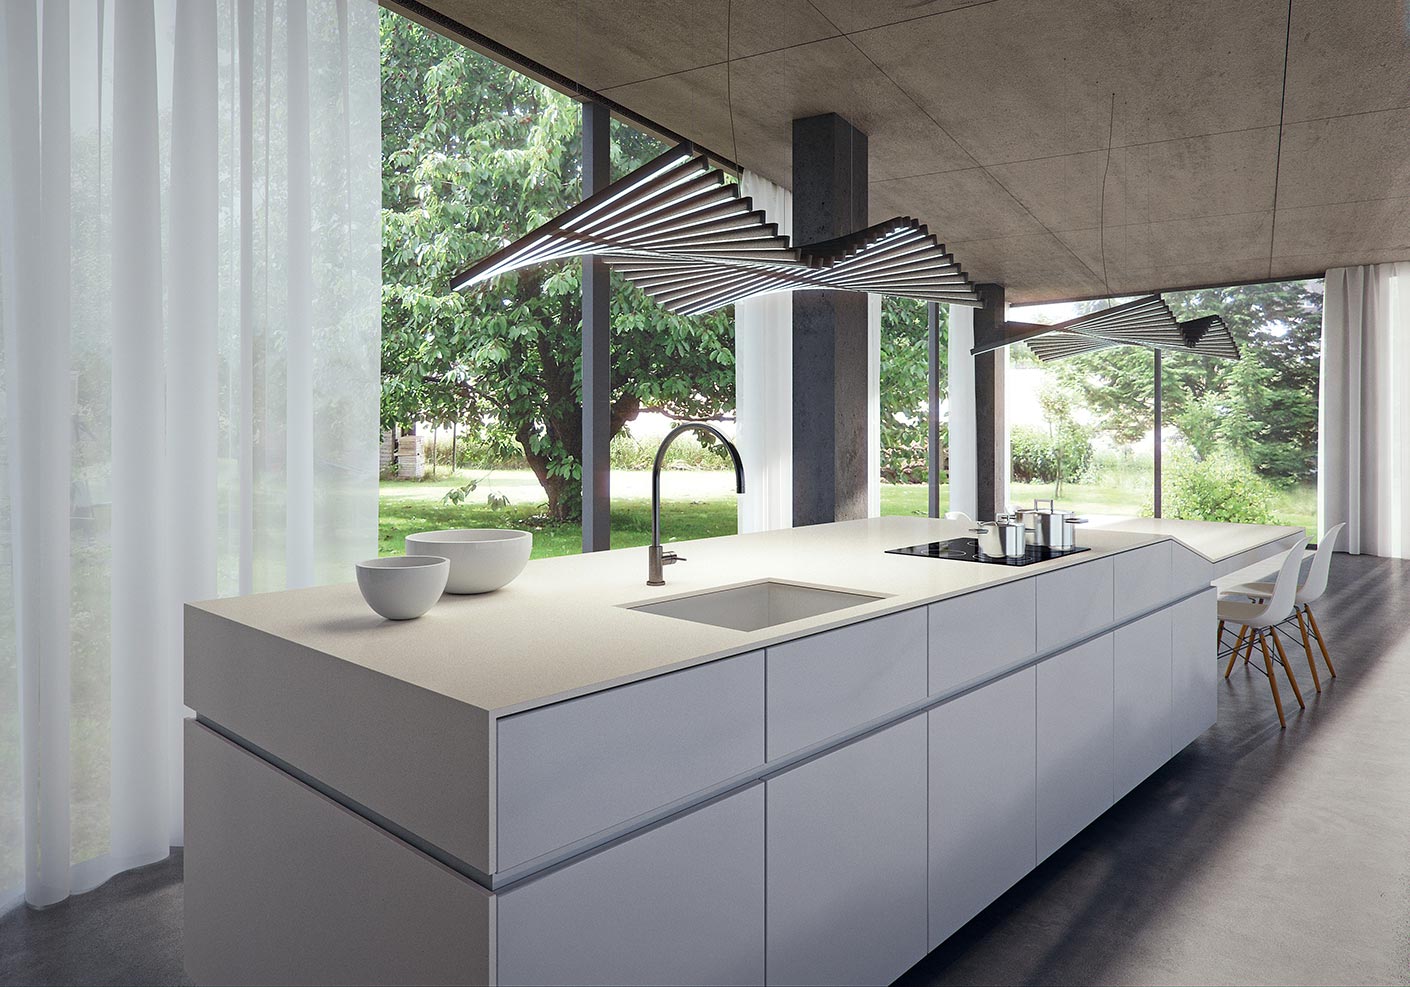 Modern kitchen with expansive window view